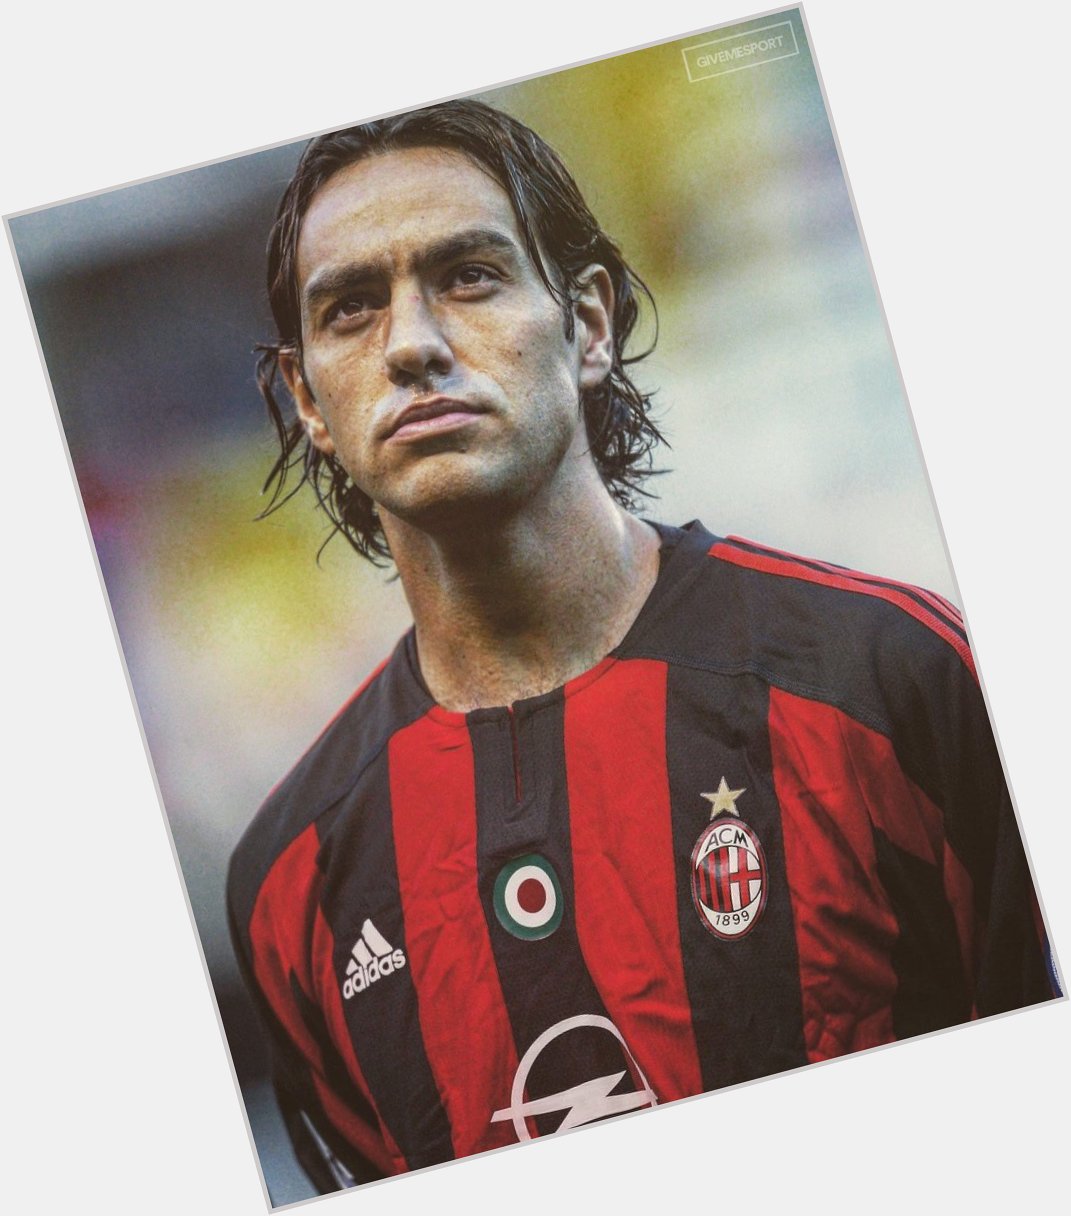 Happy birthday Alessandro Nesta! What a defender, what a player, what a career. Absolute legend. 